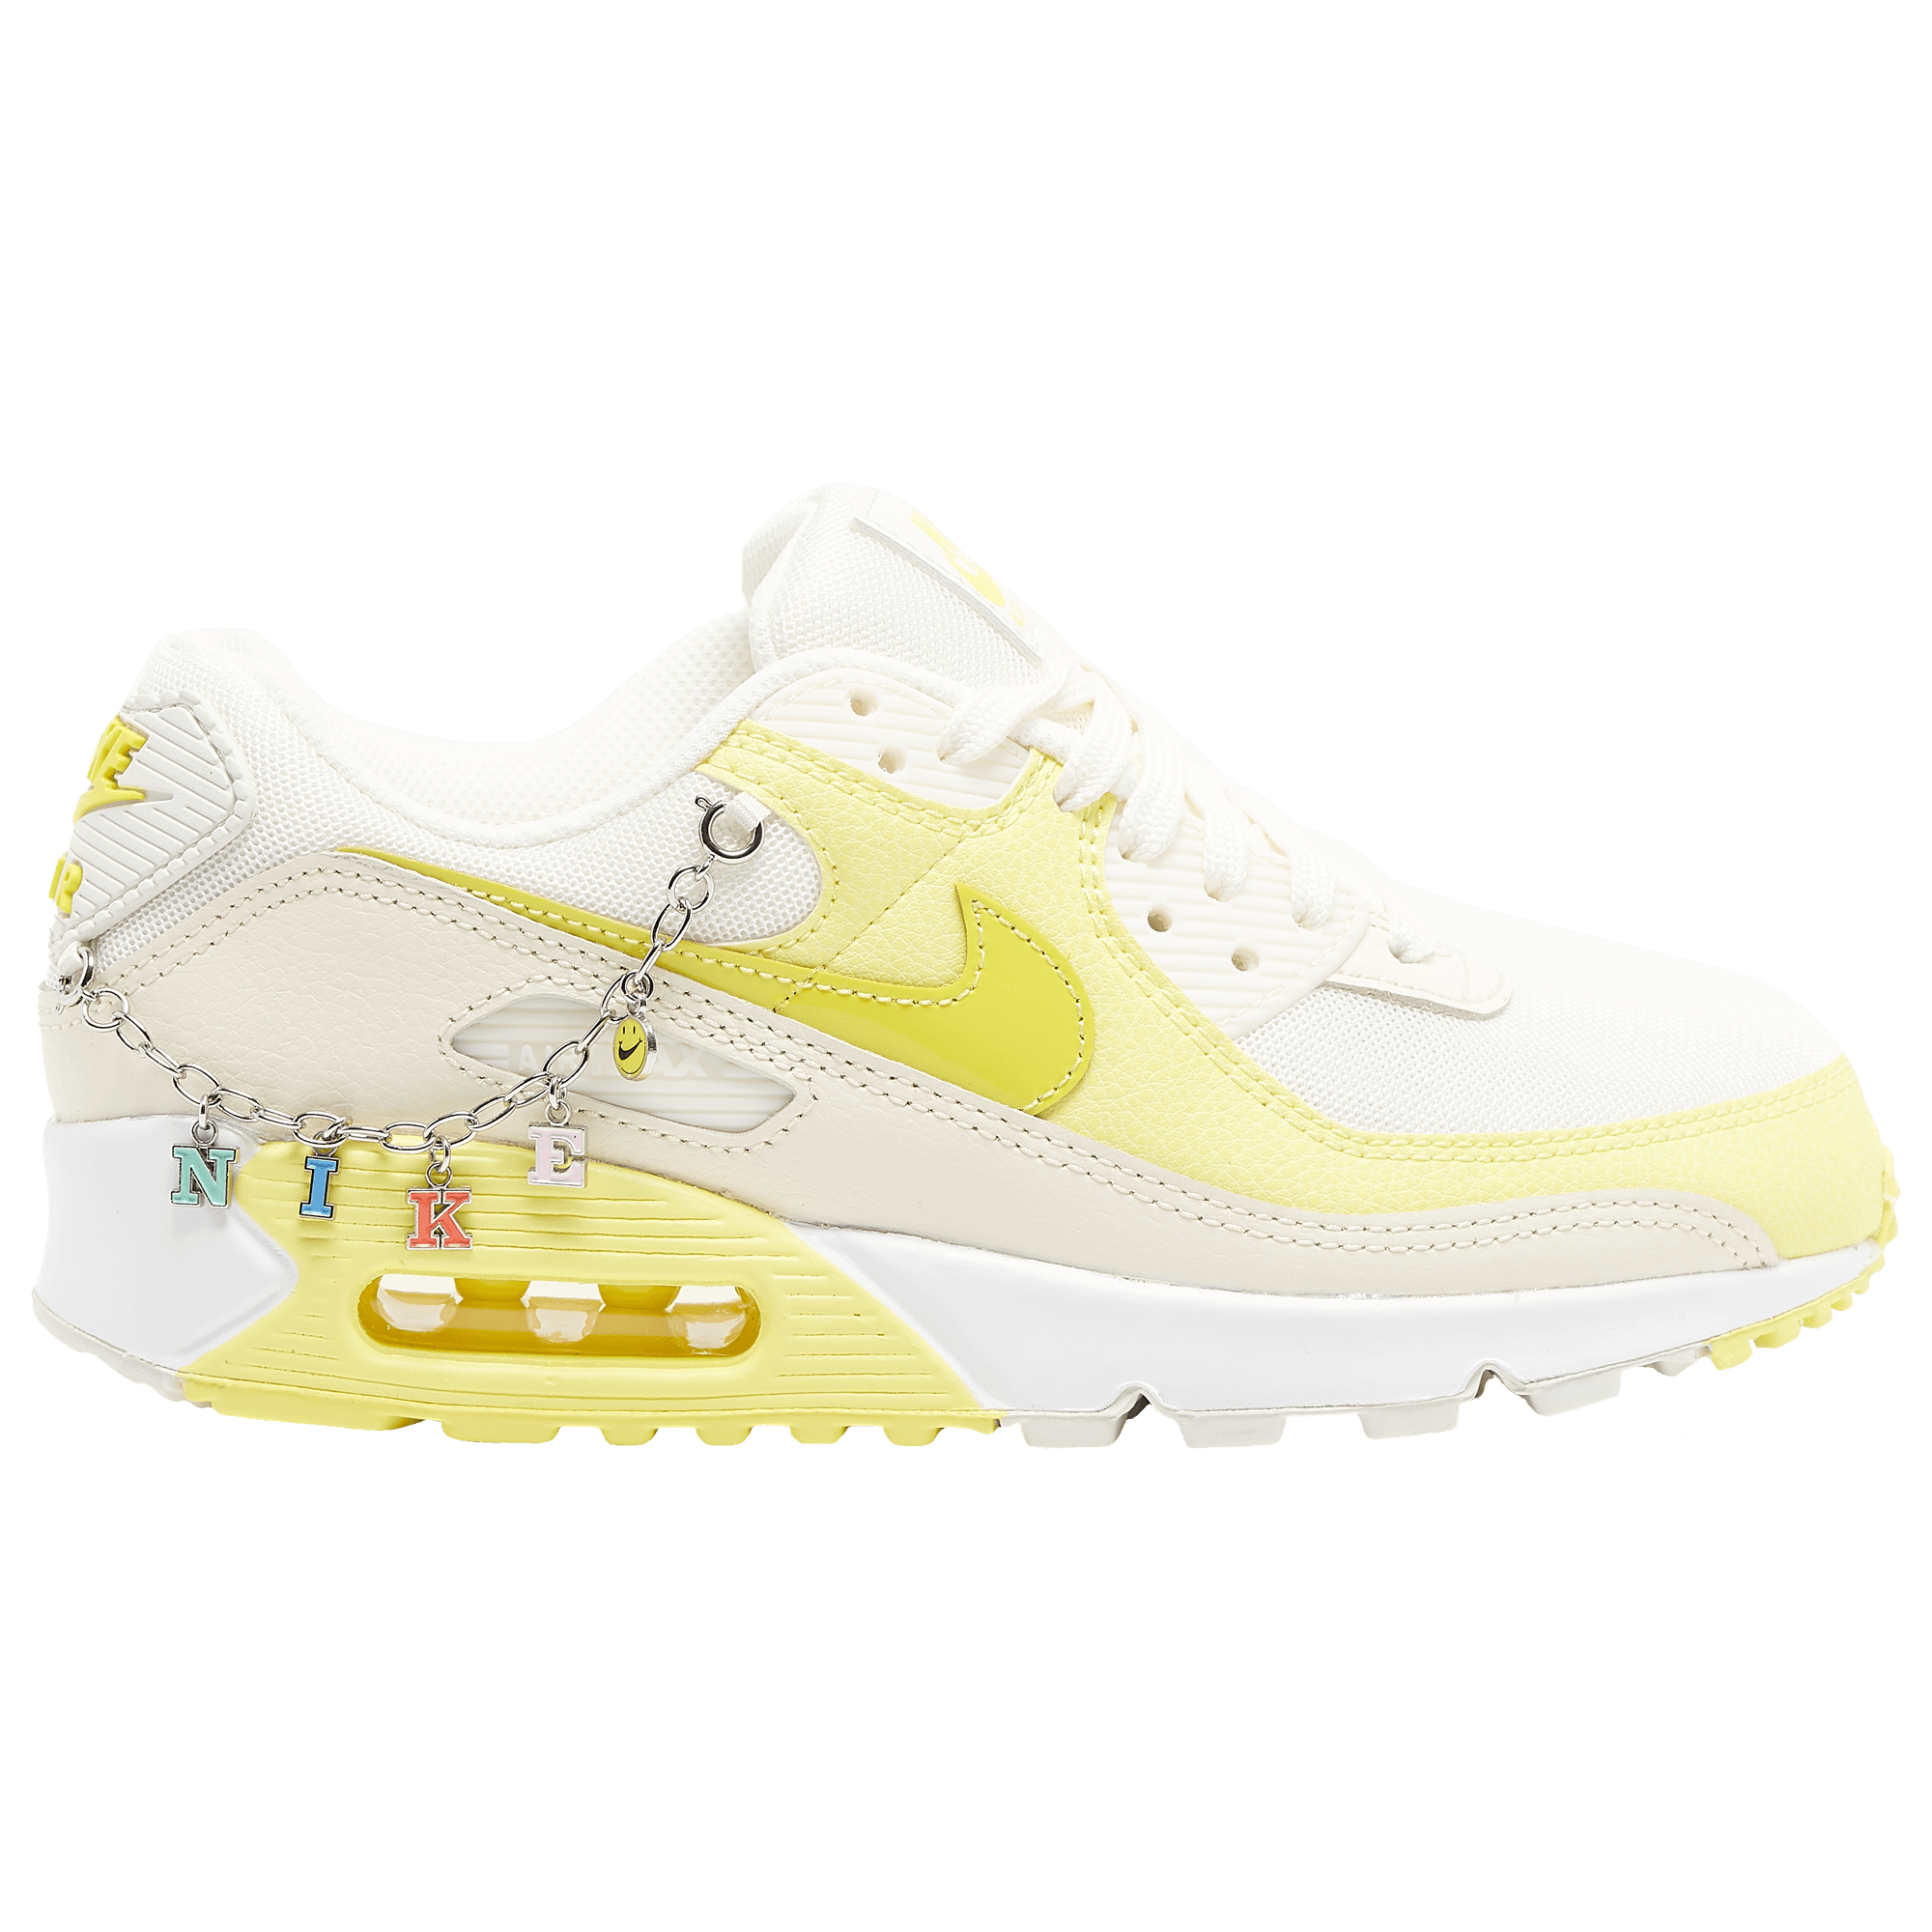 CNK-Princess-Charming-Pack-Air-Max-90-Side.png